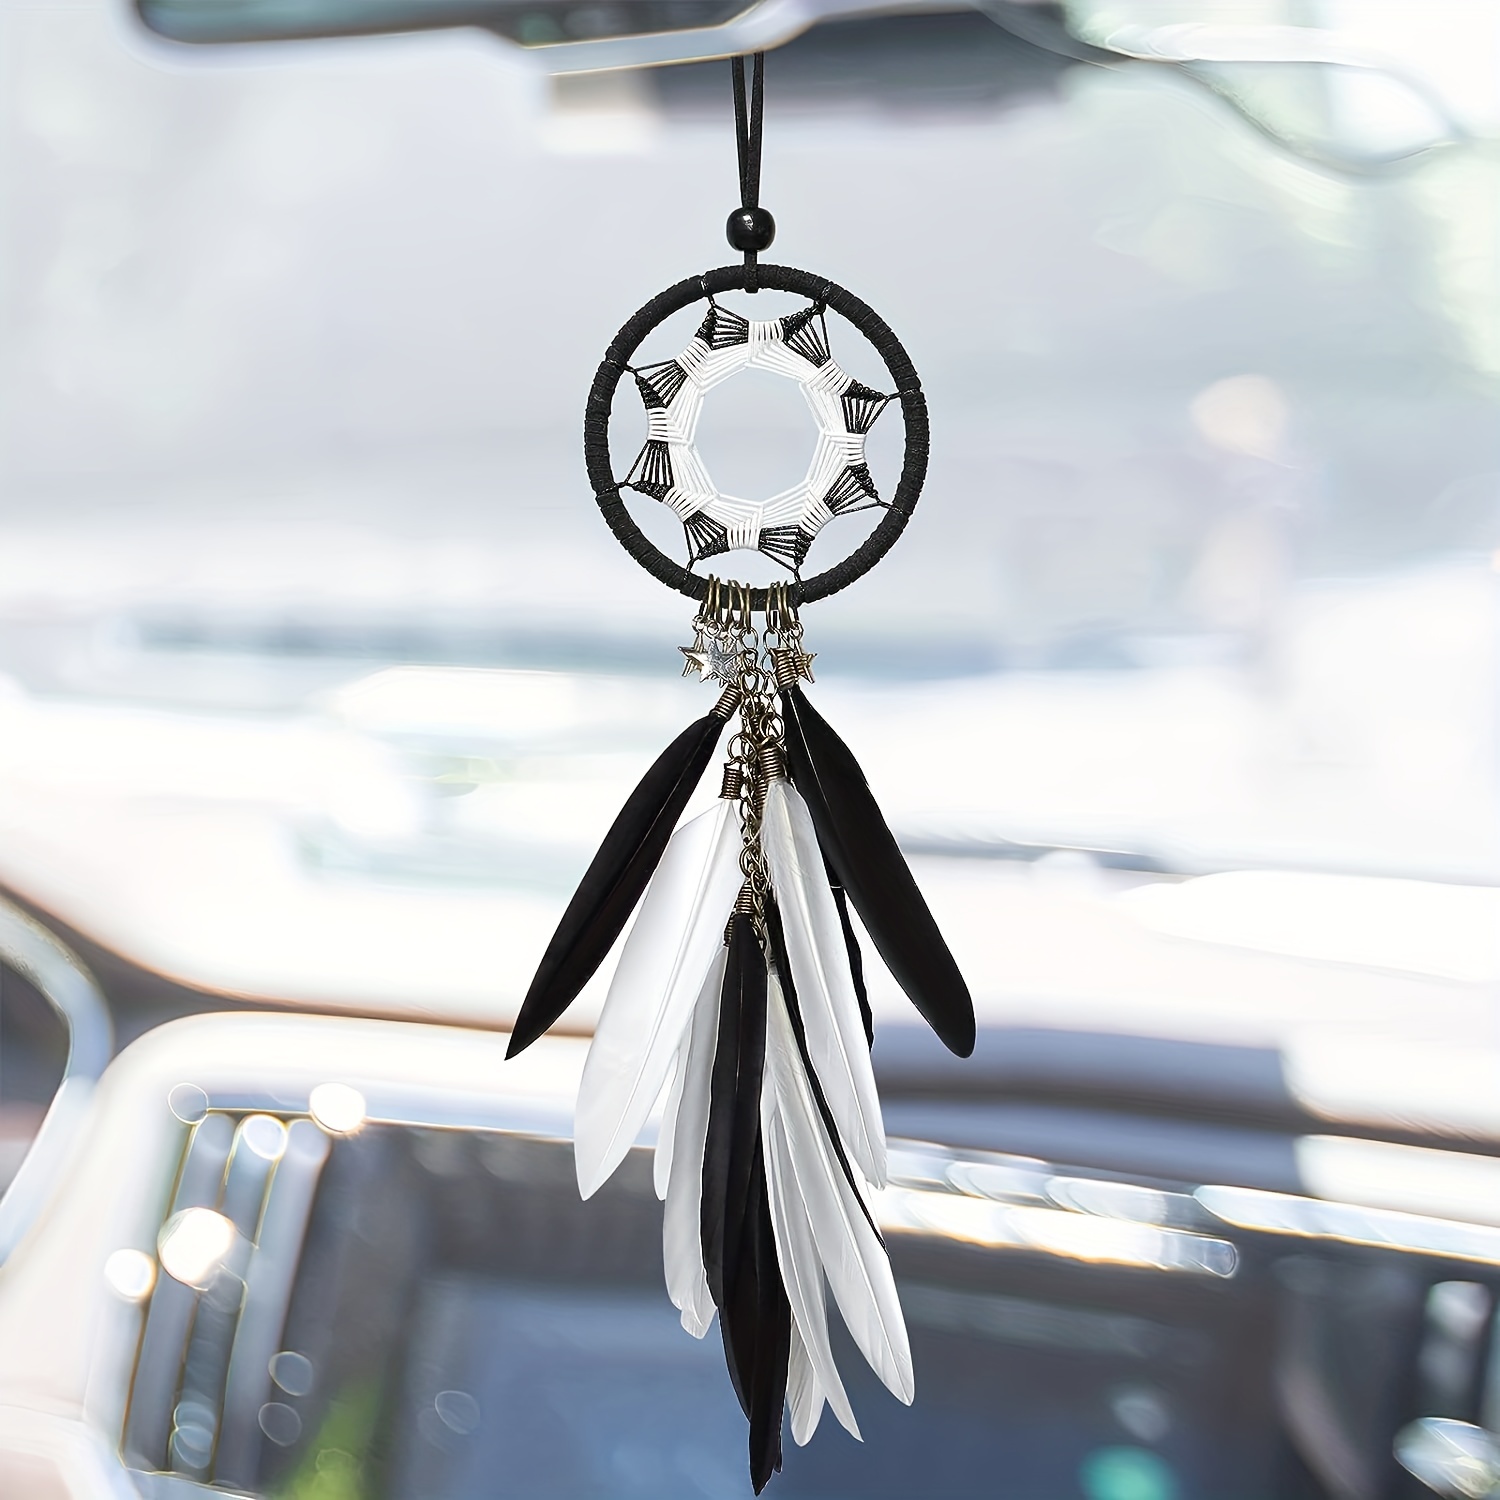 Car Rear Mirror Hang On Toy Dream Catcher Auto Decor Hanging View Interior  Gift